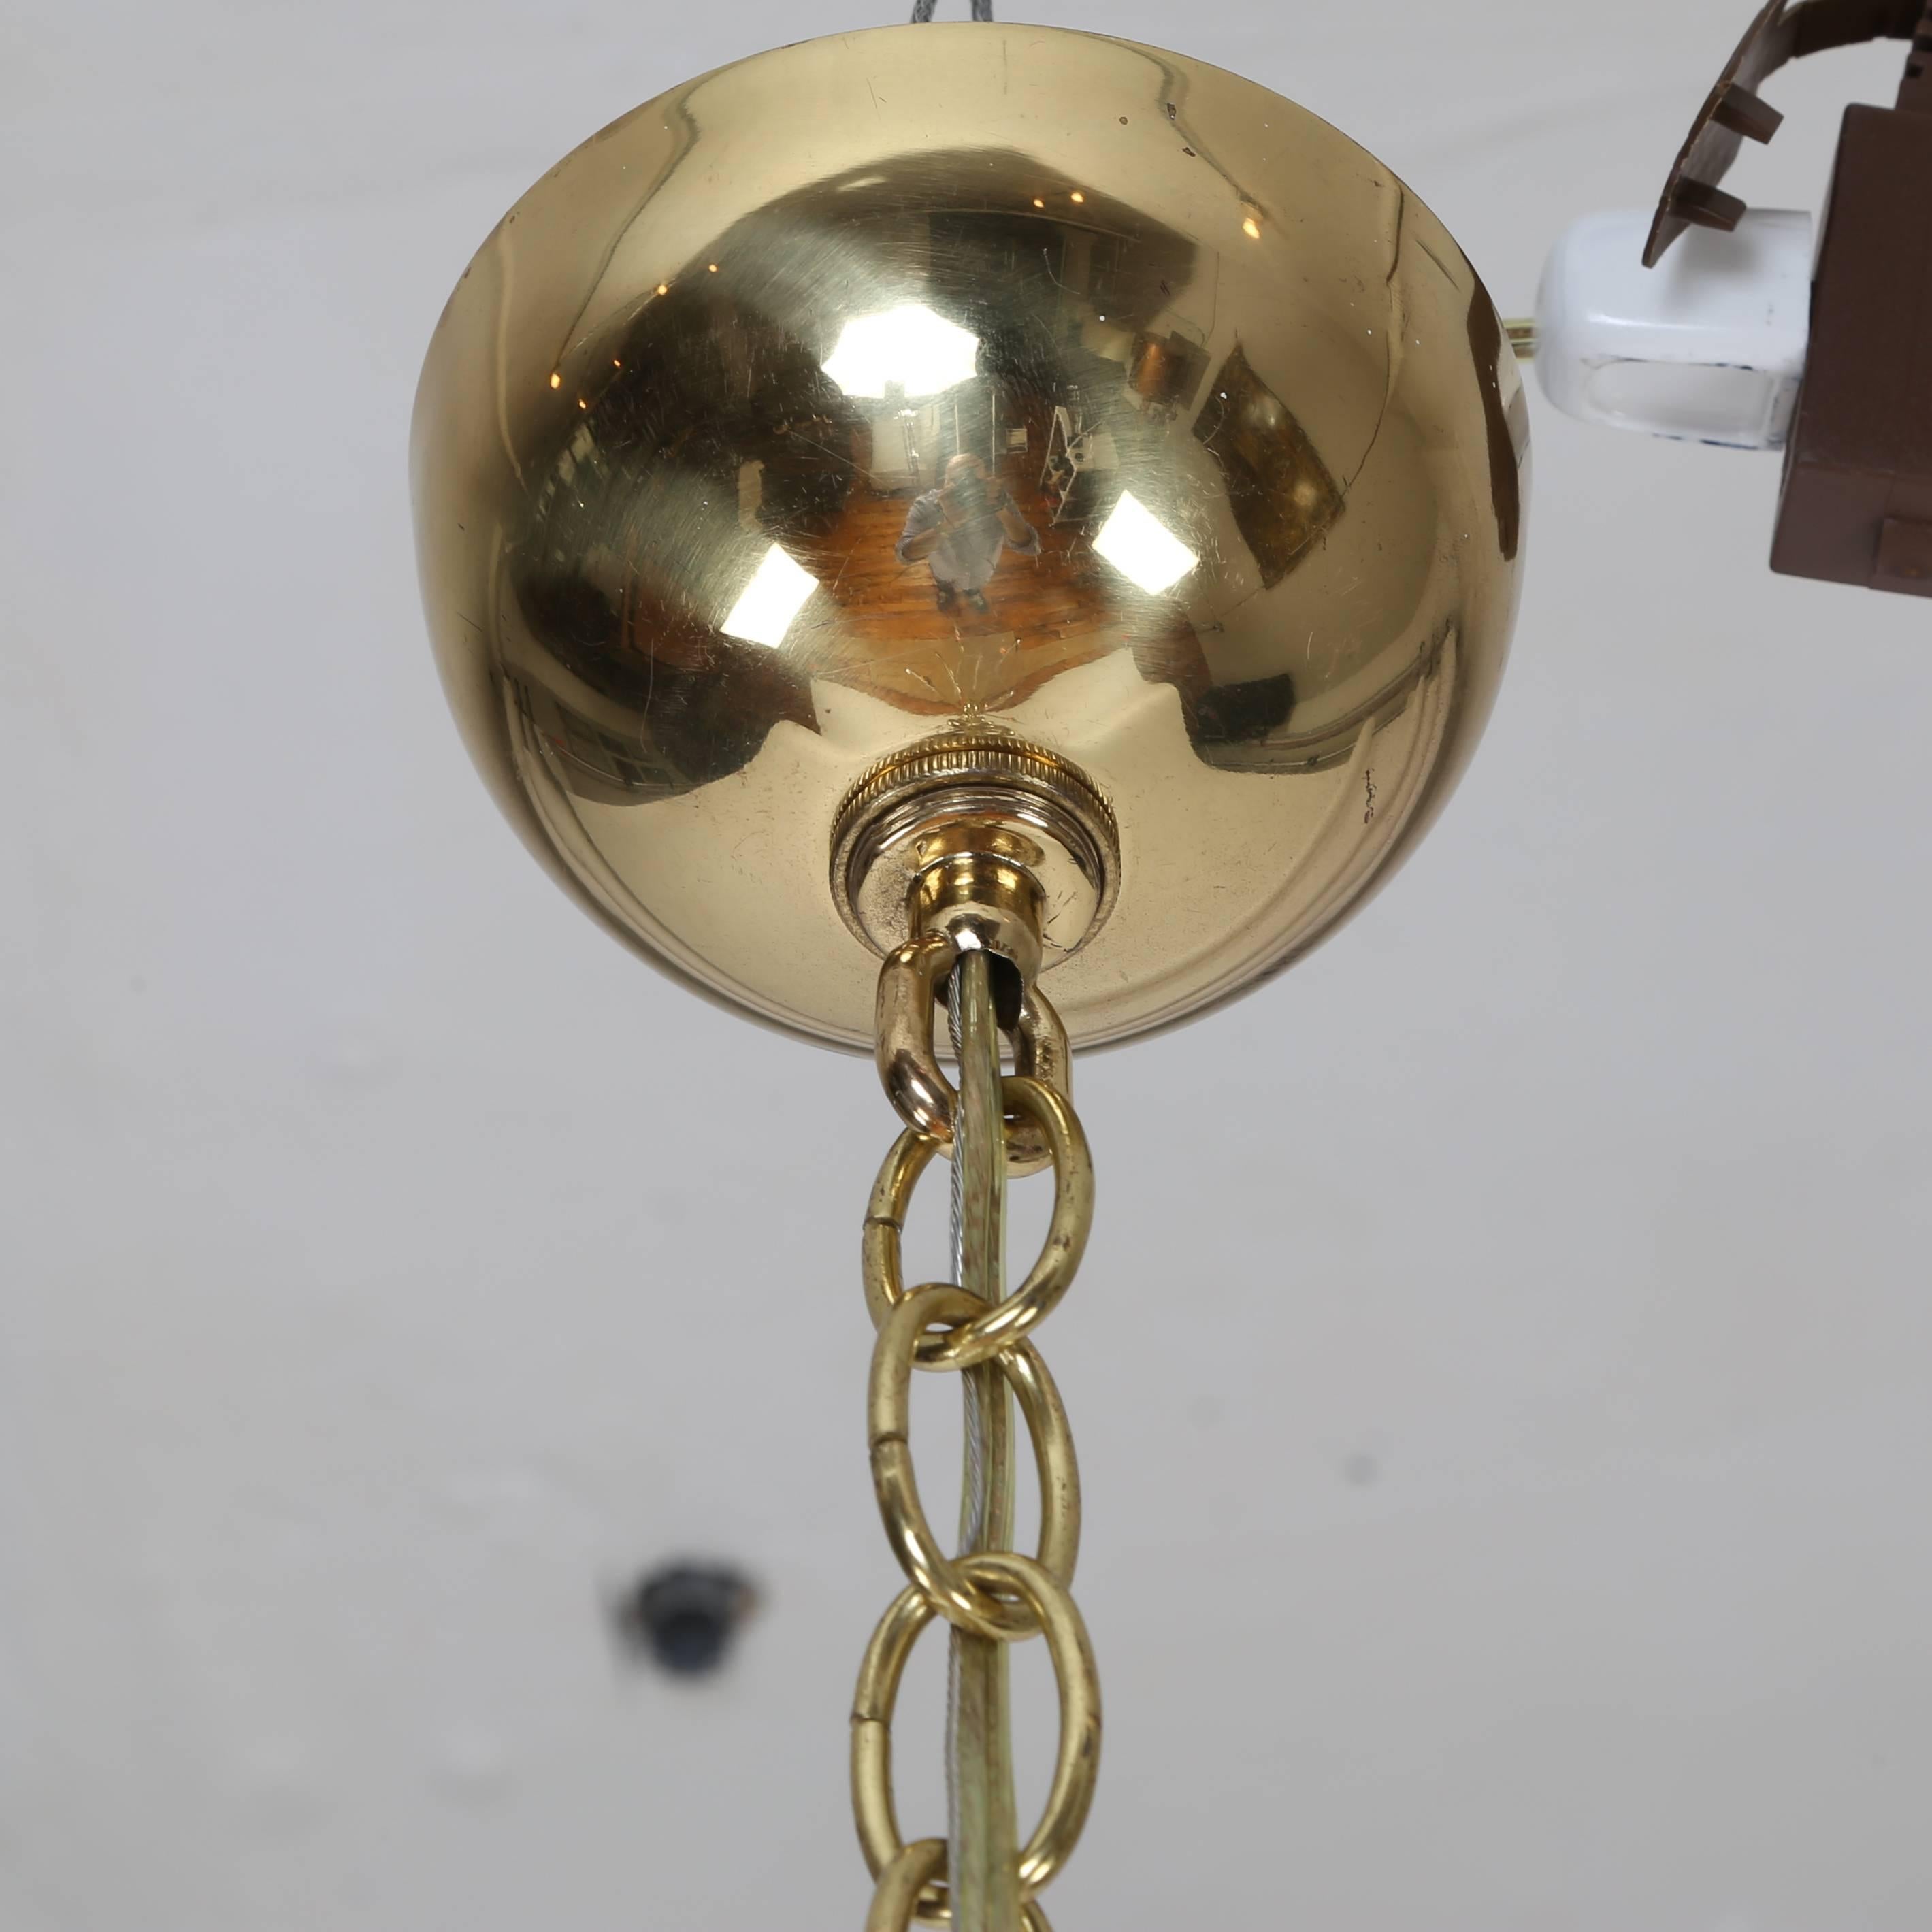 Enrico Profili Brass and Glass Loop Chandelier, Circa 1960s For Sale 3